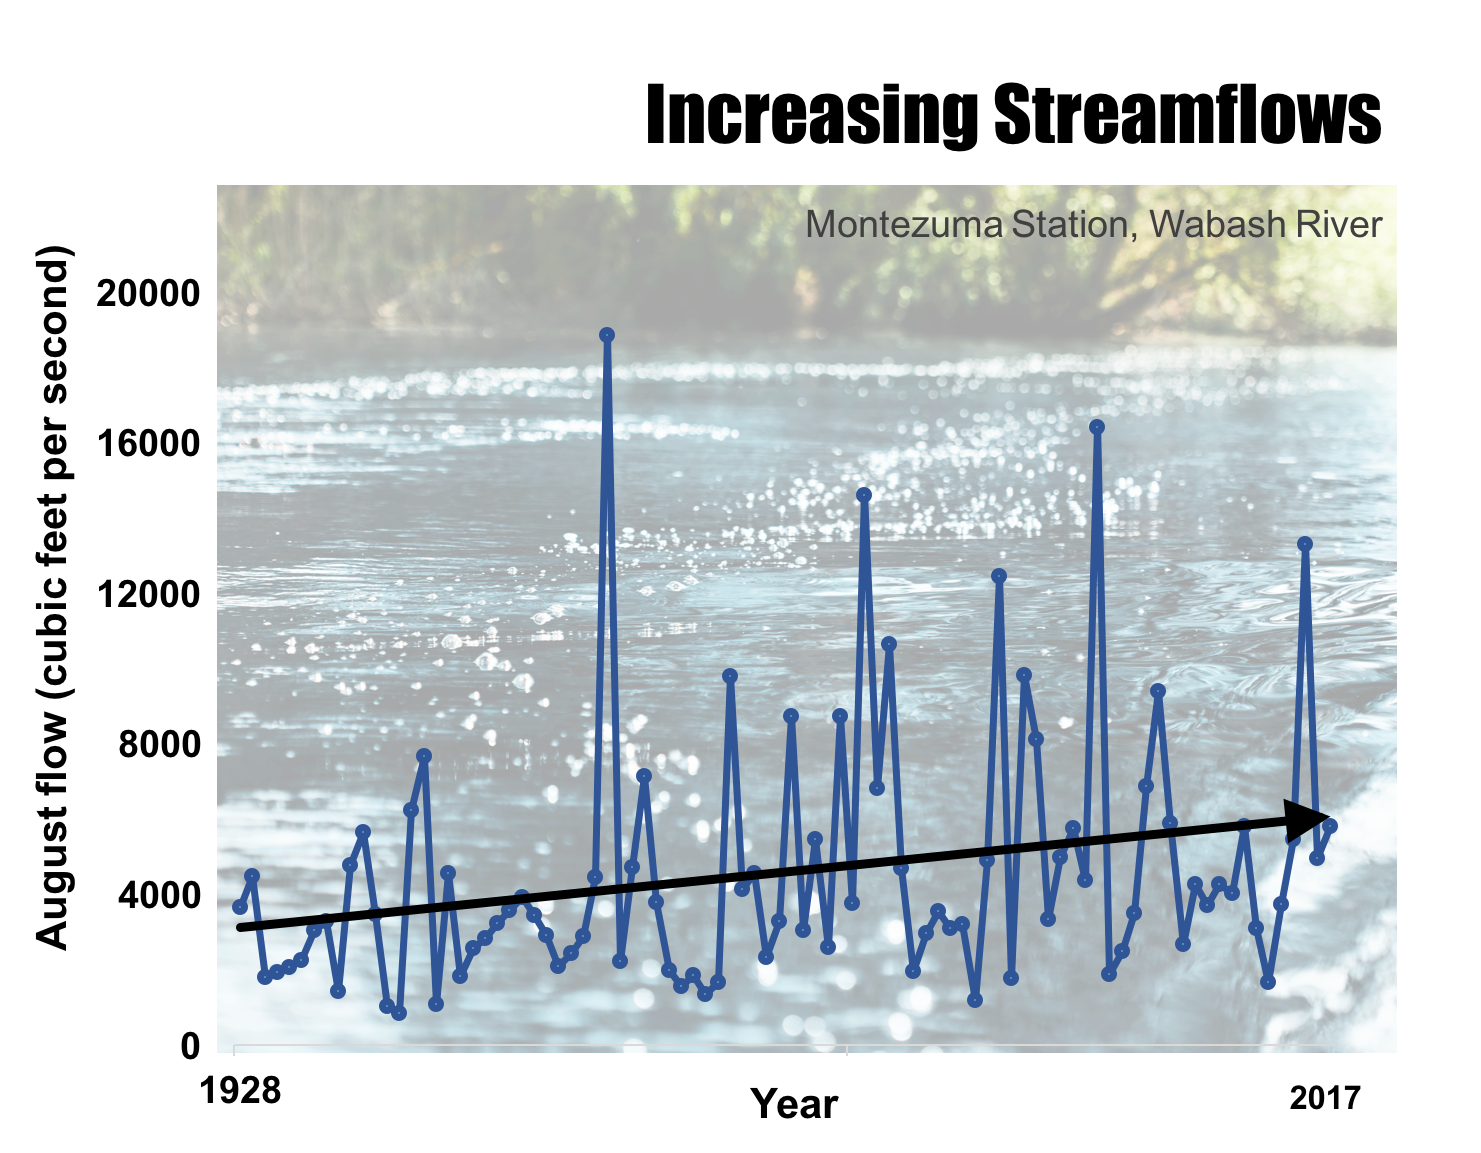 Average August streamflow at the USGS Montezuma measuring station along the Wabash River in west central Indiana from 1928 to 2017. The black line shows the upward trend in streamflow. (Source: Höök et al., in review).